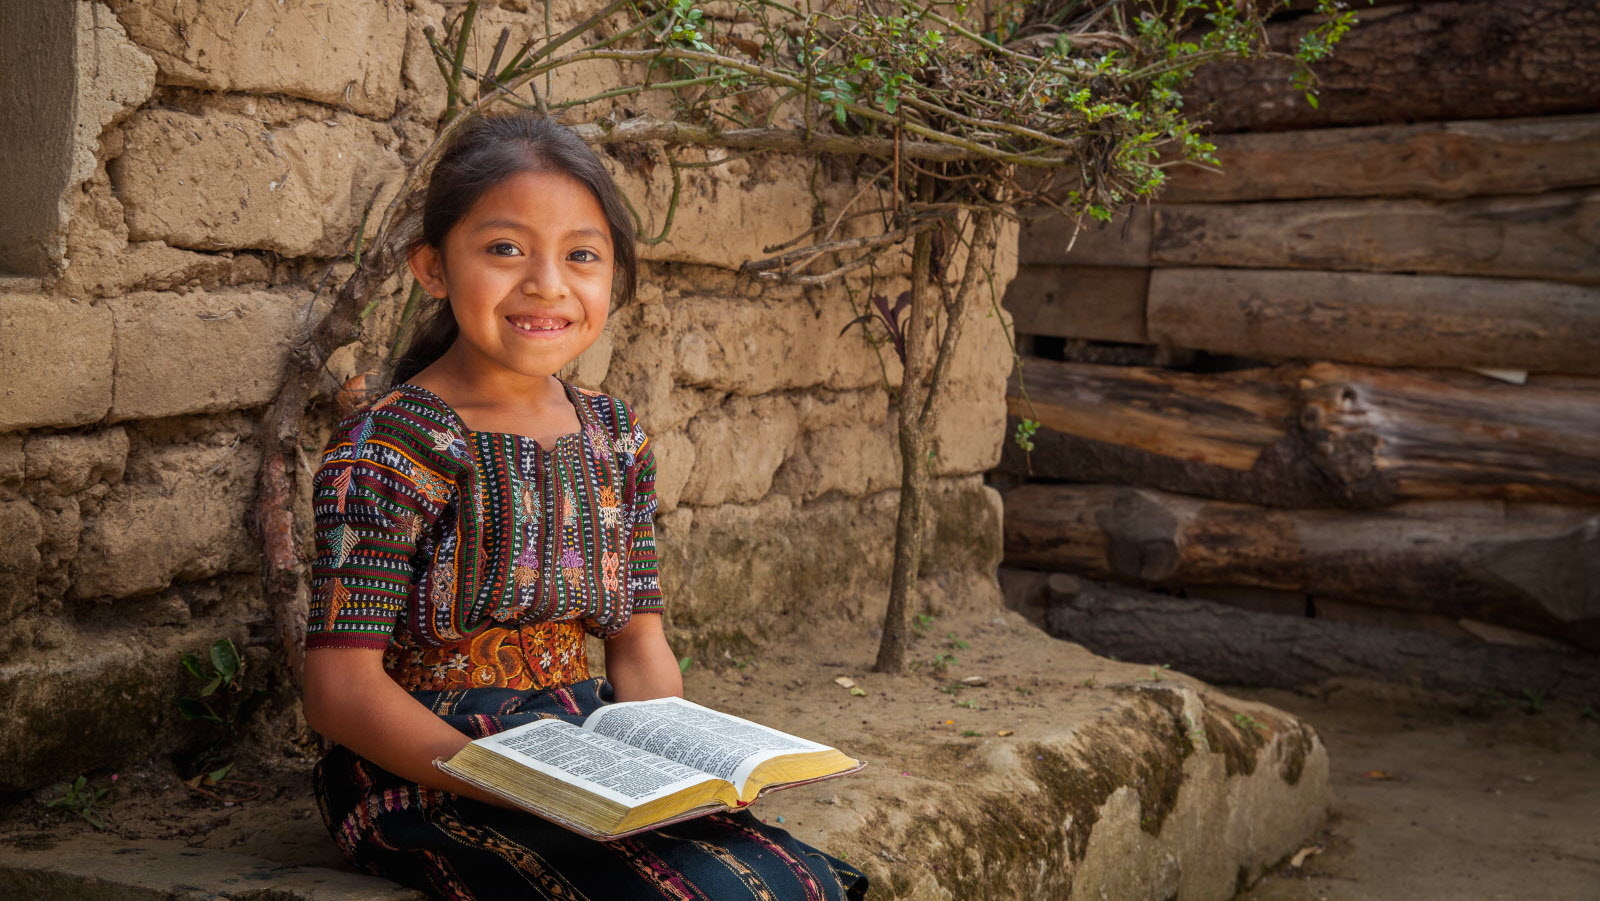 Yennifer, age 6, holds her family's bible. She lives in Guatemala. ©2015 World Vision, Lindsey Minerva.